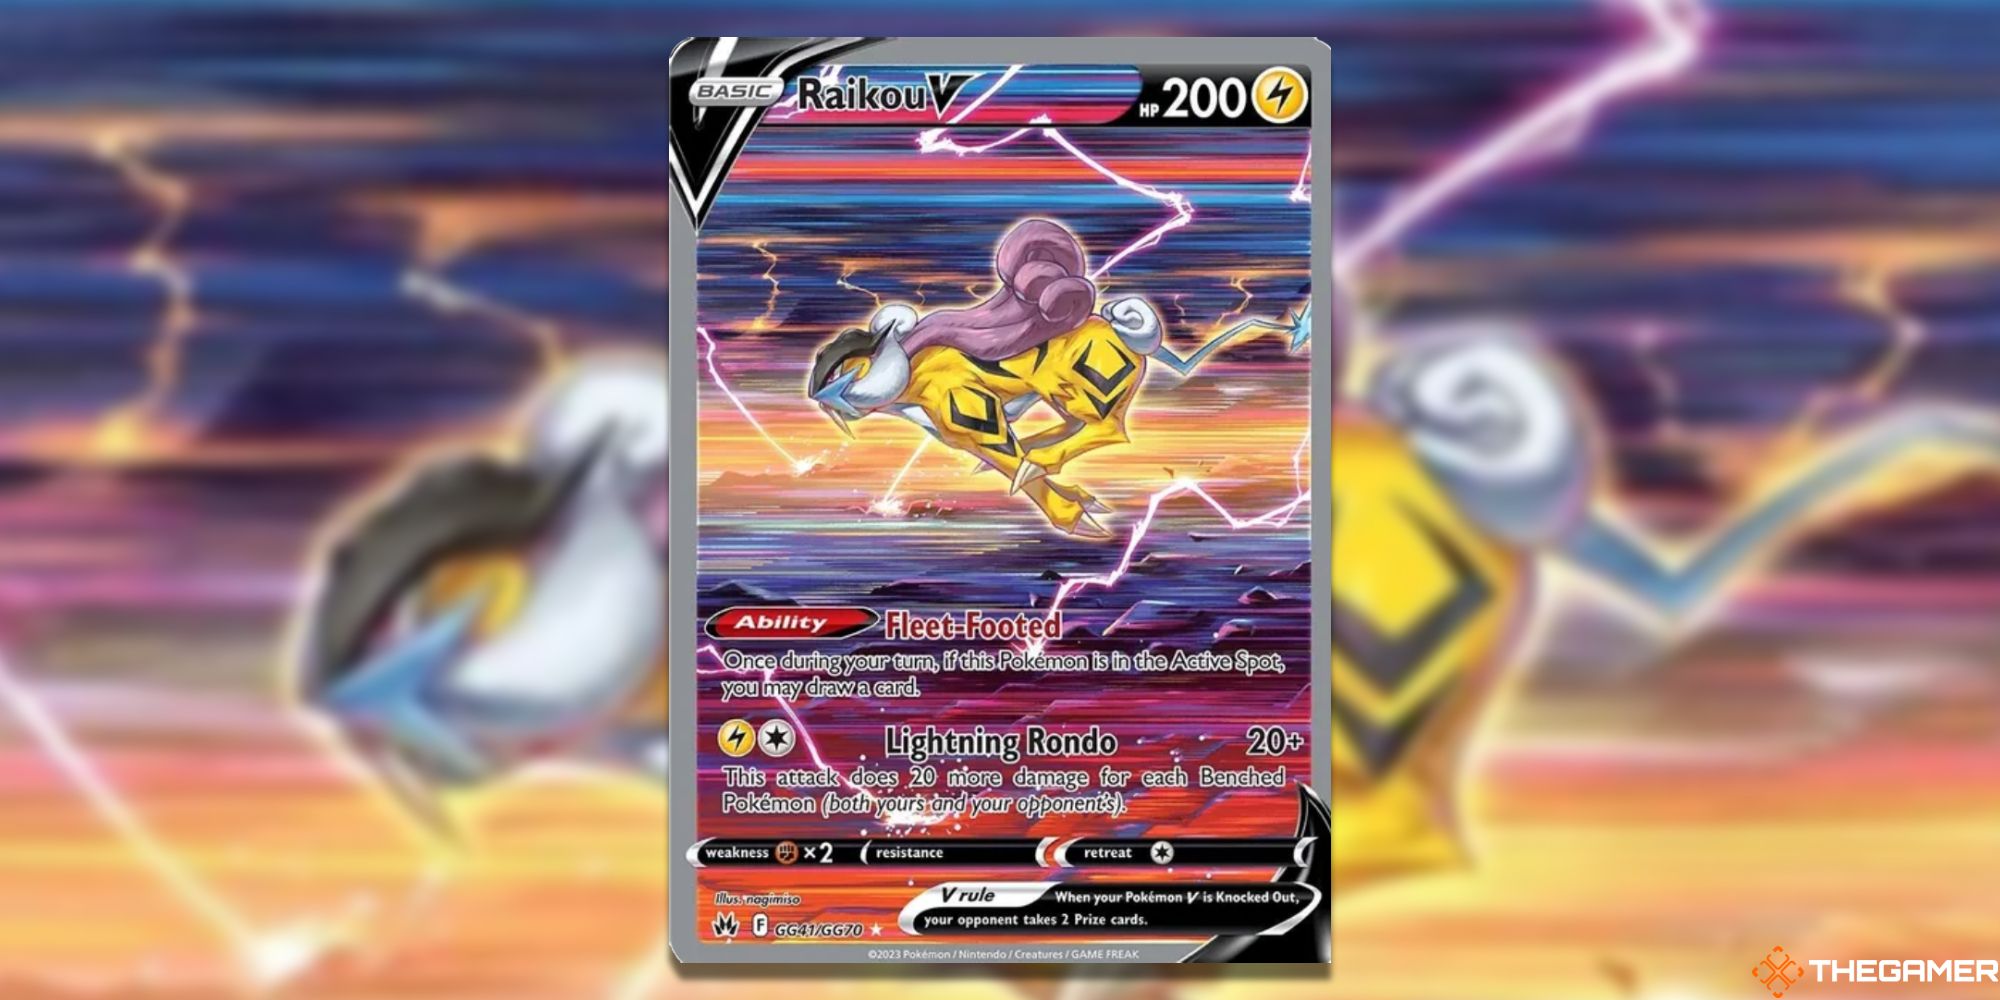 Image of the card Raikou V in Pokemon TCG, with art by nagimiso